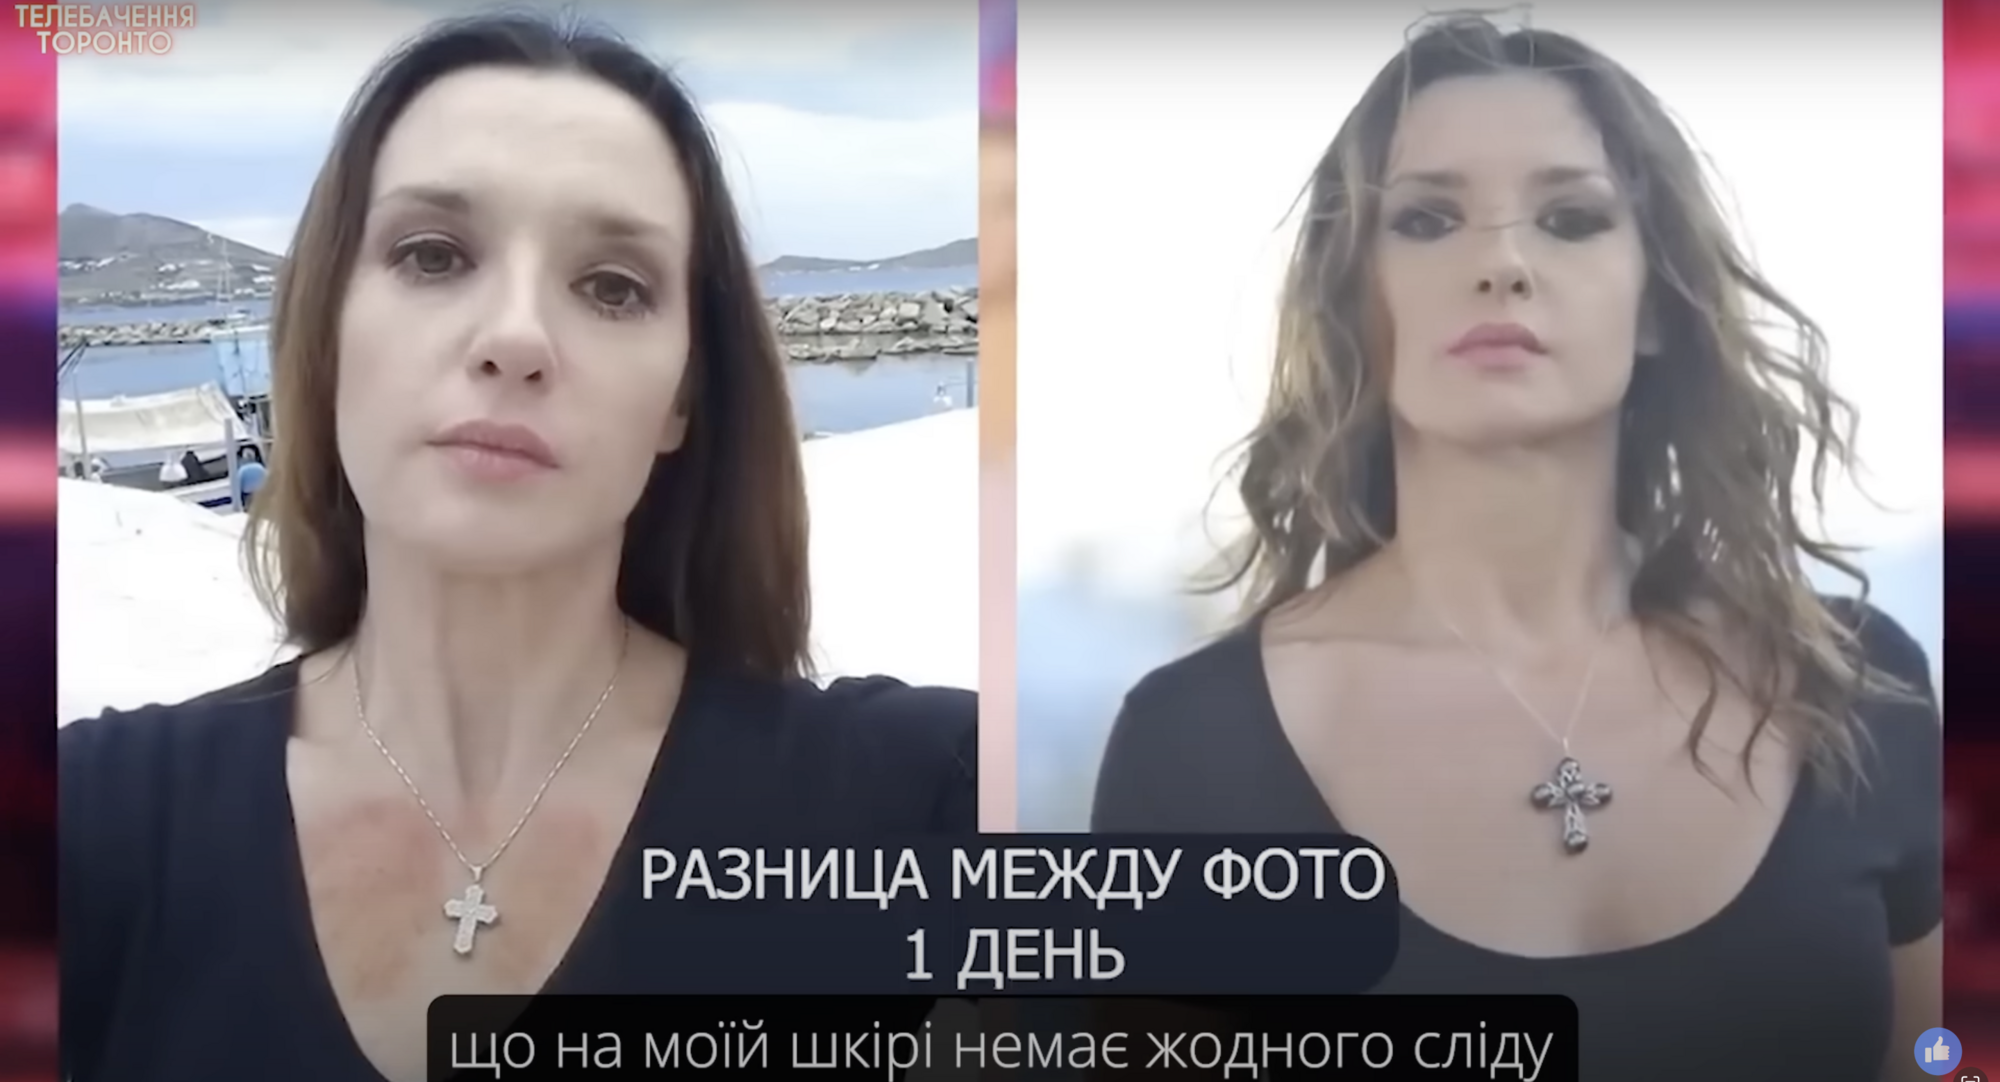 Oksana Marchenko surfaced online with a new ''show'': she walks with a backpack and talks about ''8 bloody wounds on her chest''